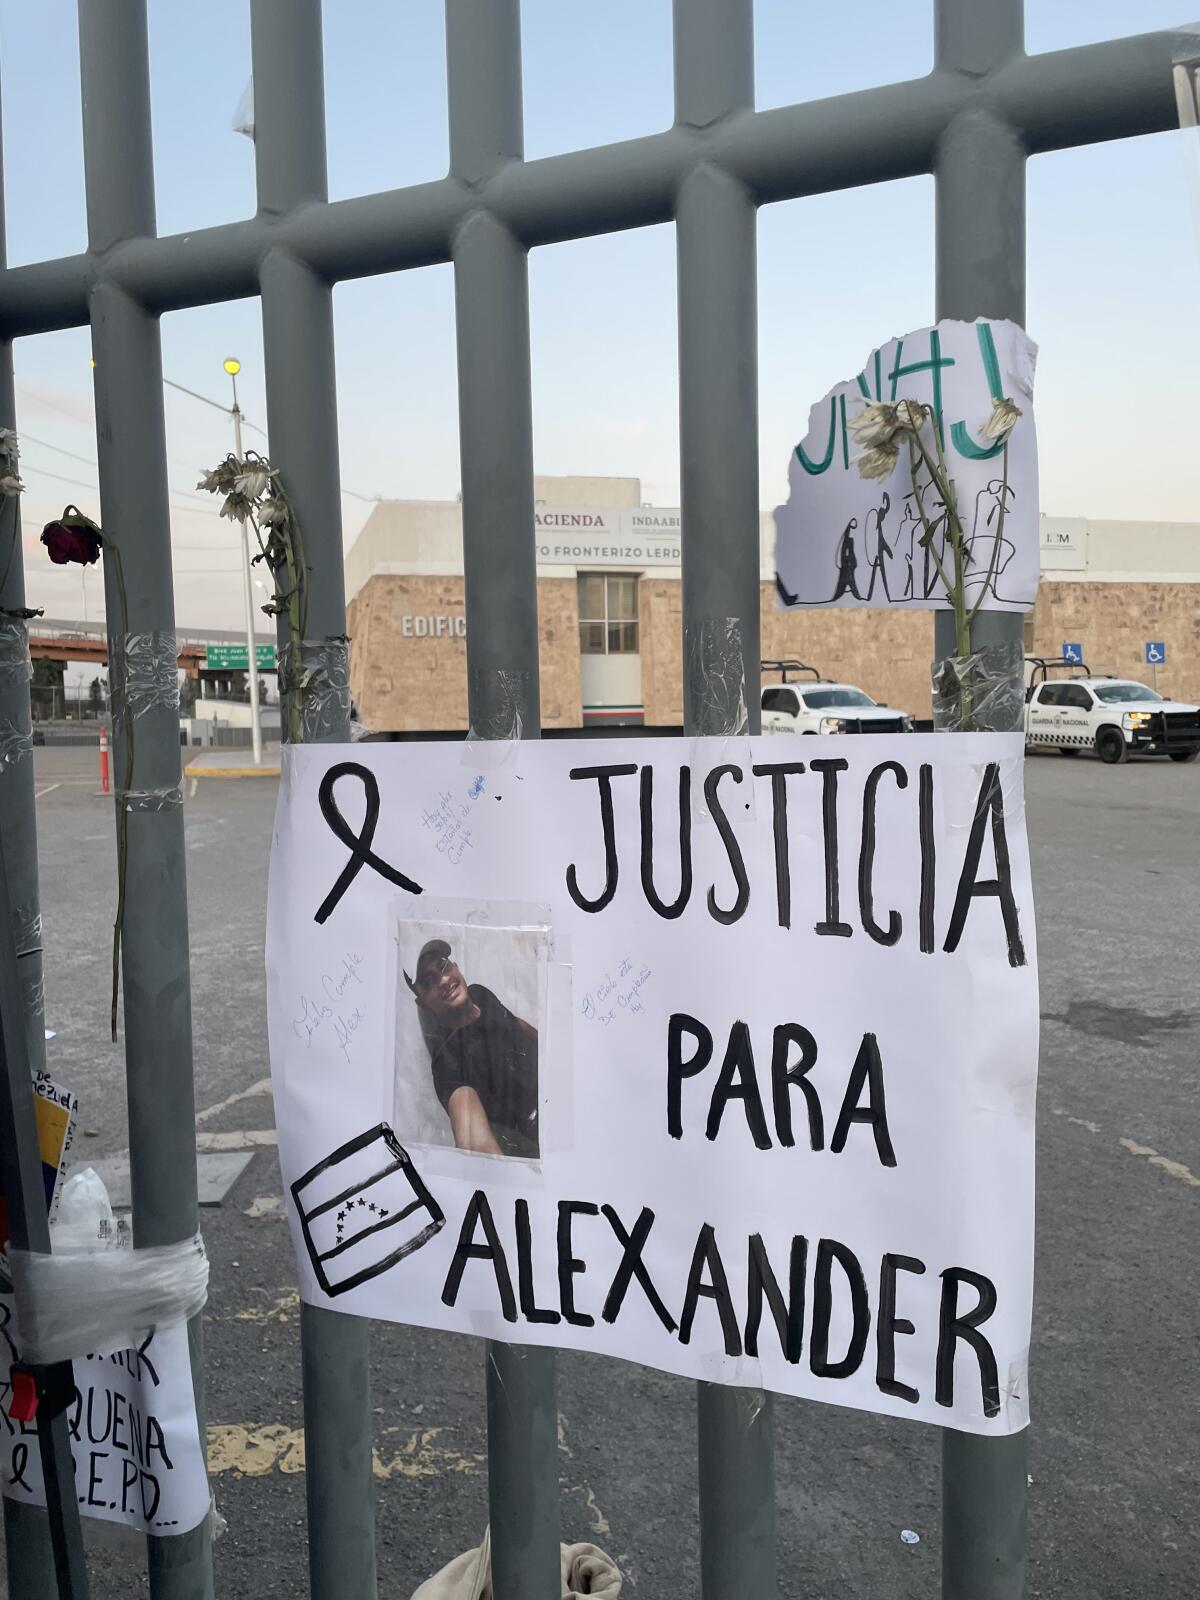 A sign on metal bars reads, "Justicia para Alexander" 